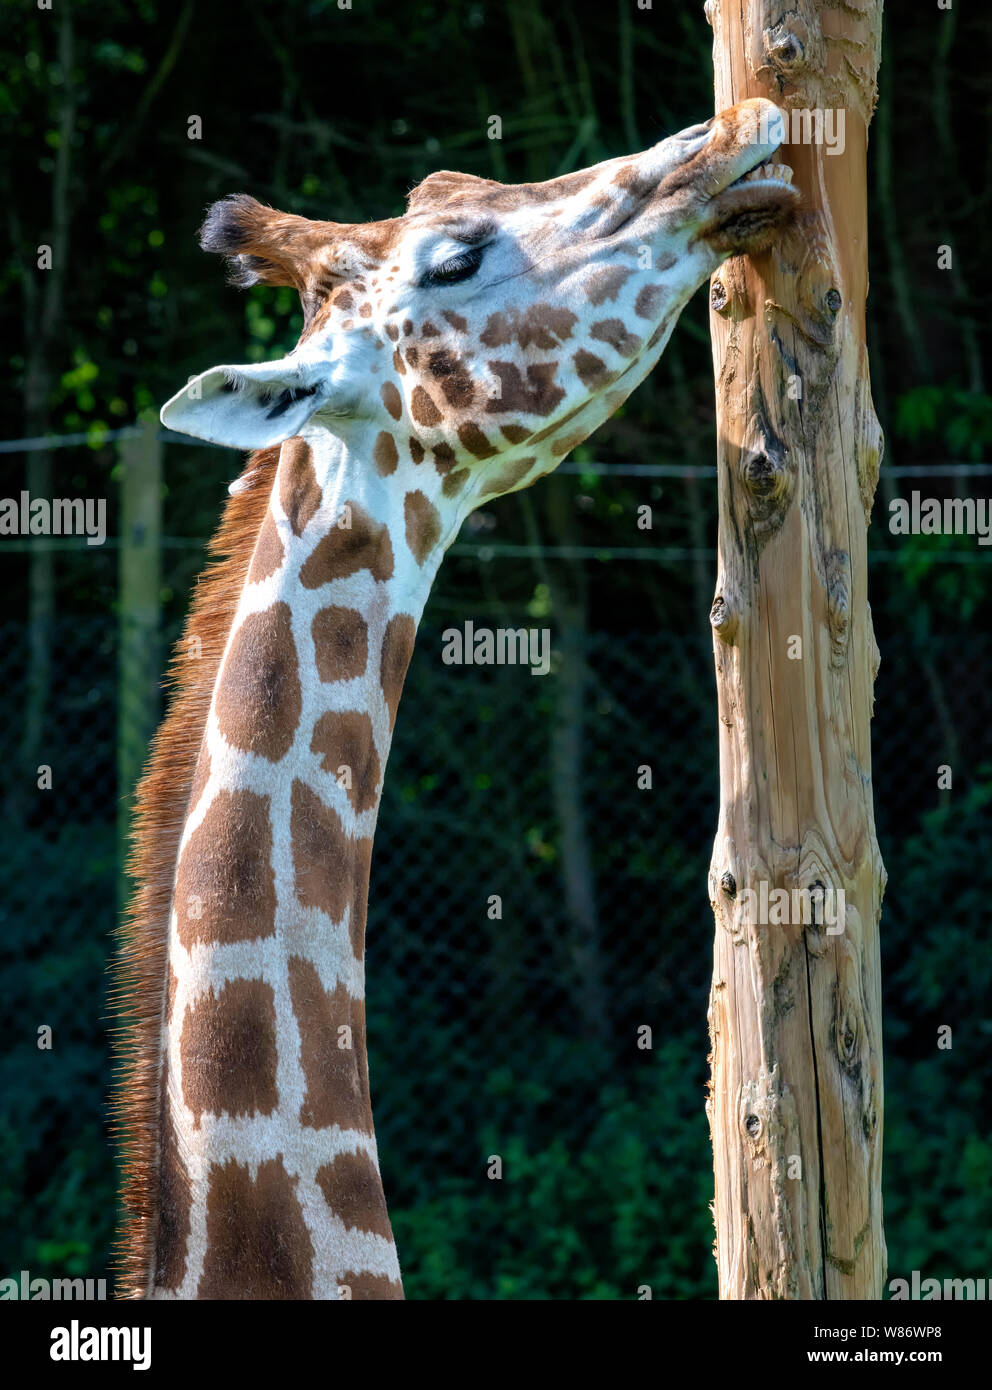 A Giraffe (Giraffa Camelopardalis) at Blackpool Zoo, chewing the bark from a tree trunk Stock Photo